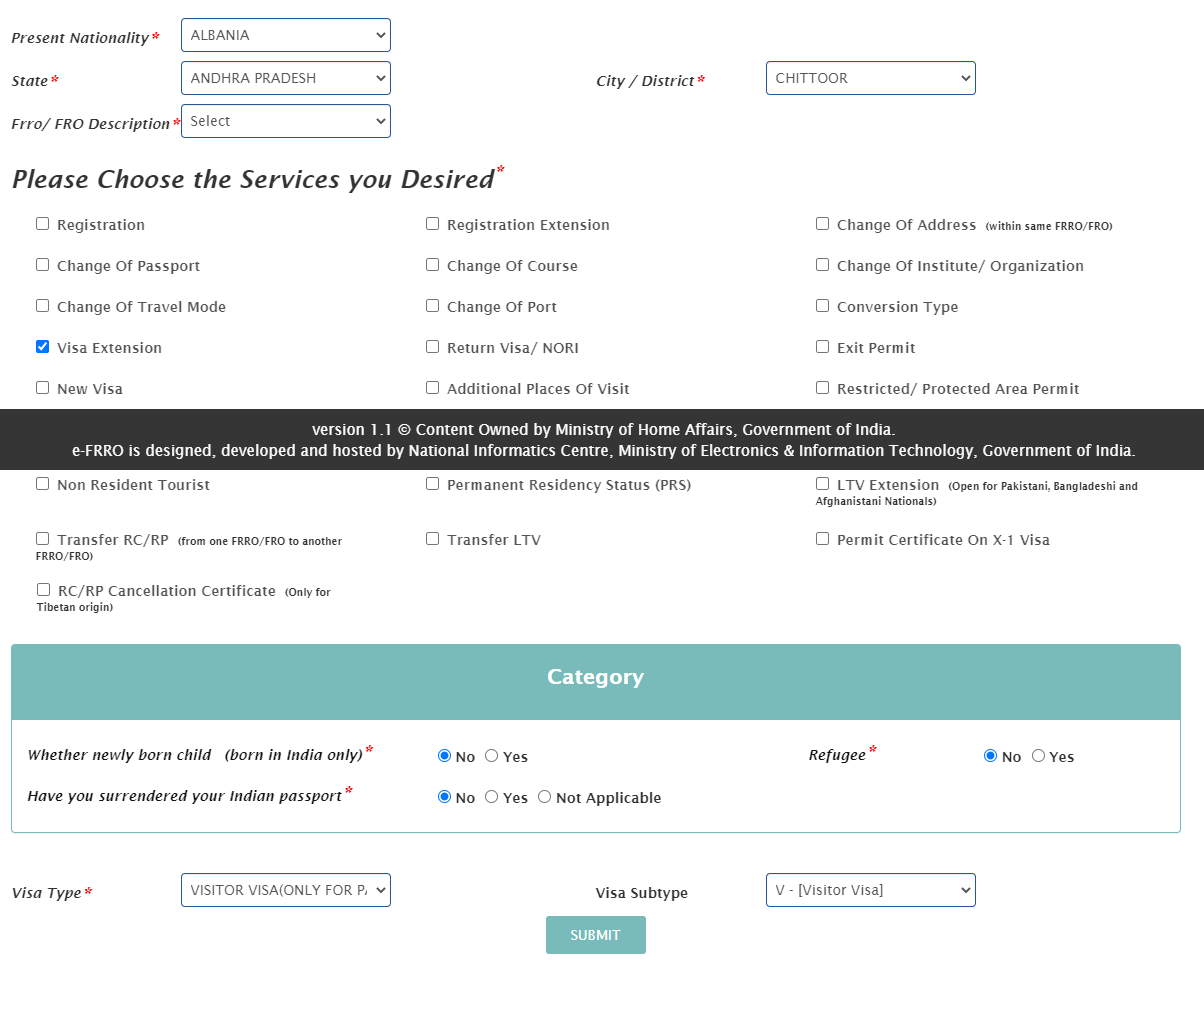 Desired services and category